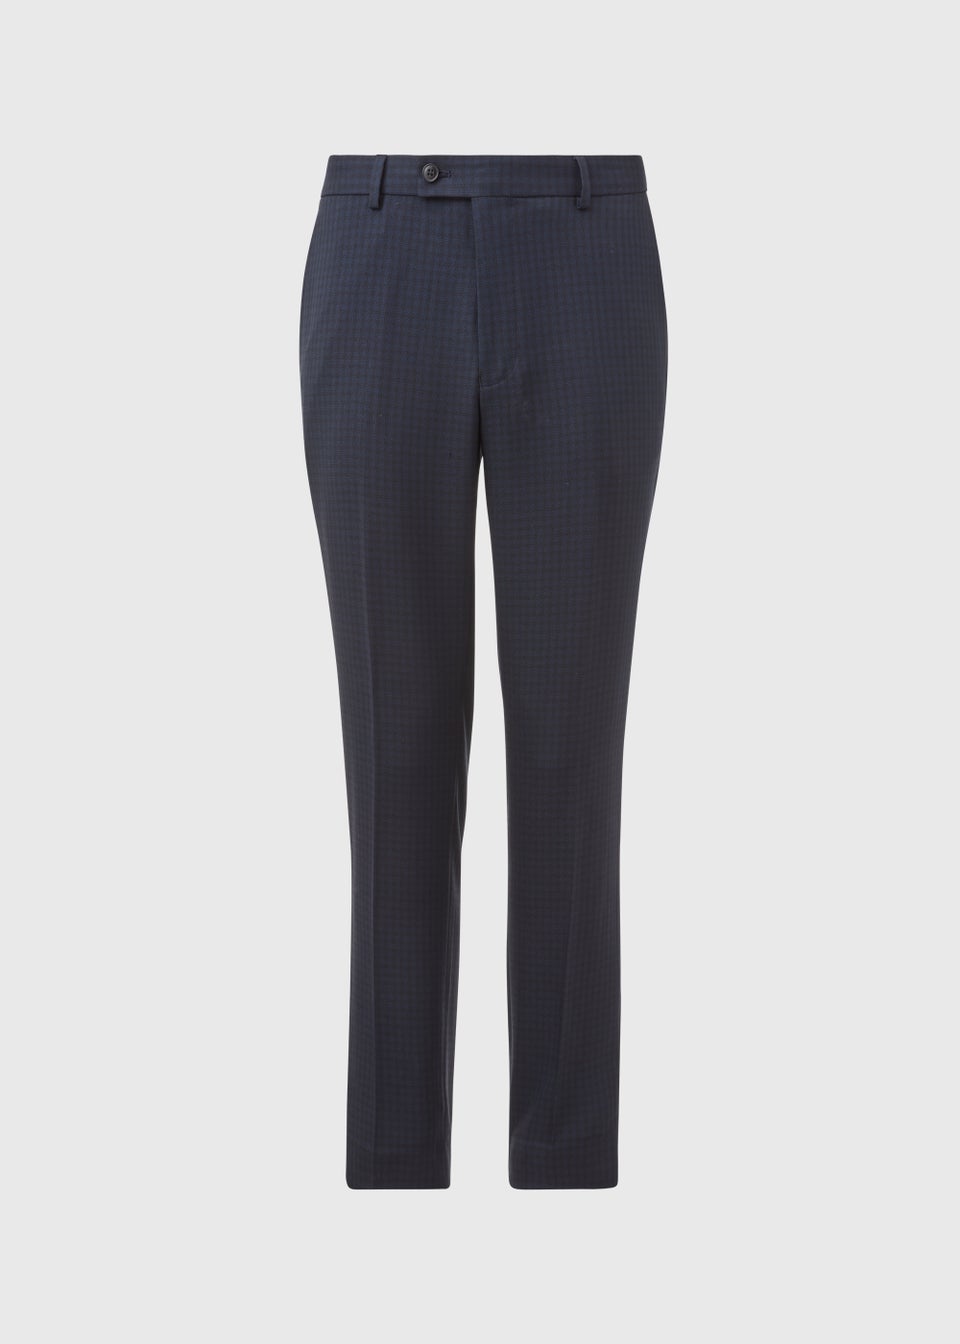 Taylor & Wright Tyne Navy Check Tailored Fit Trousers